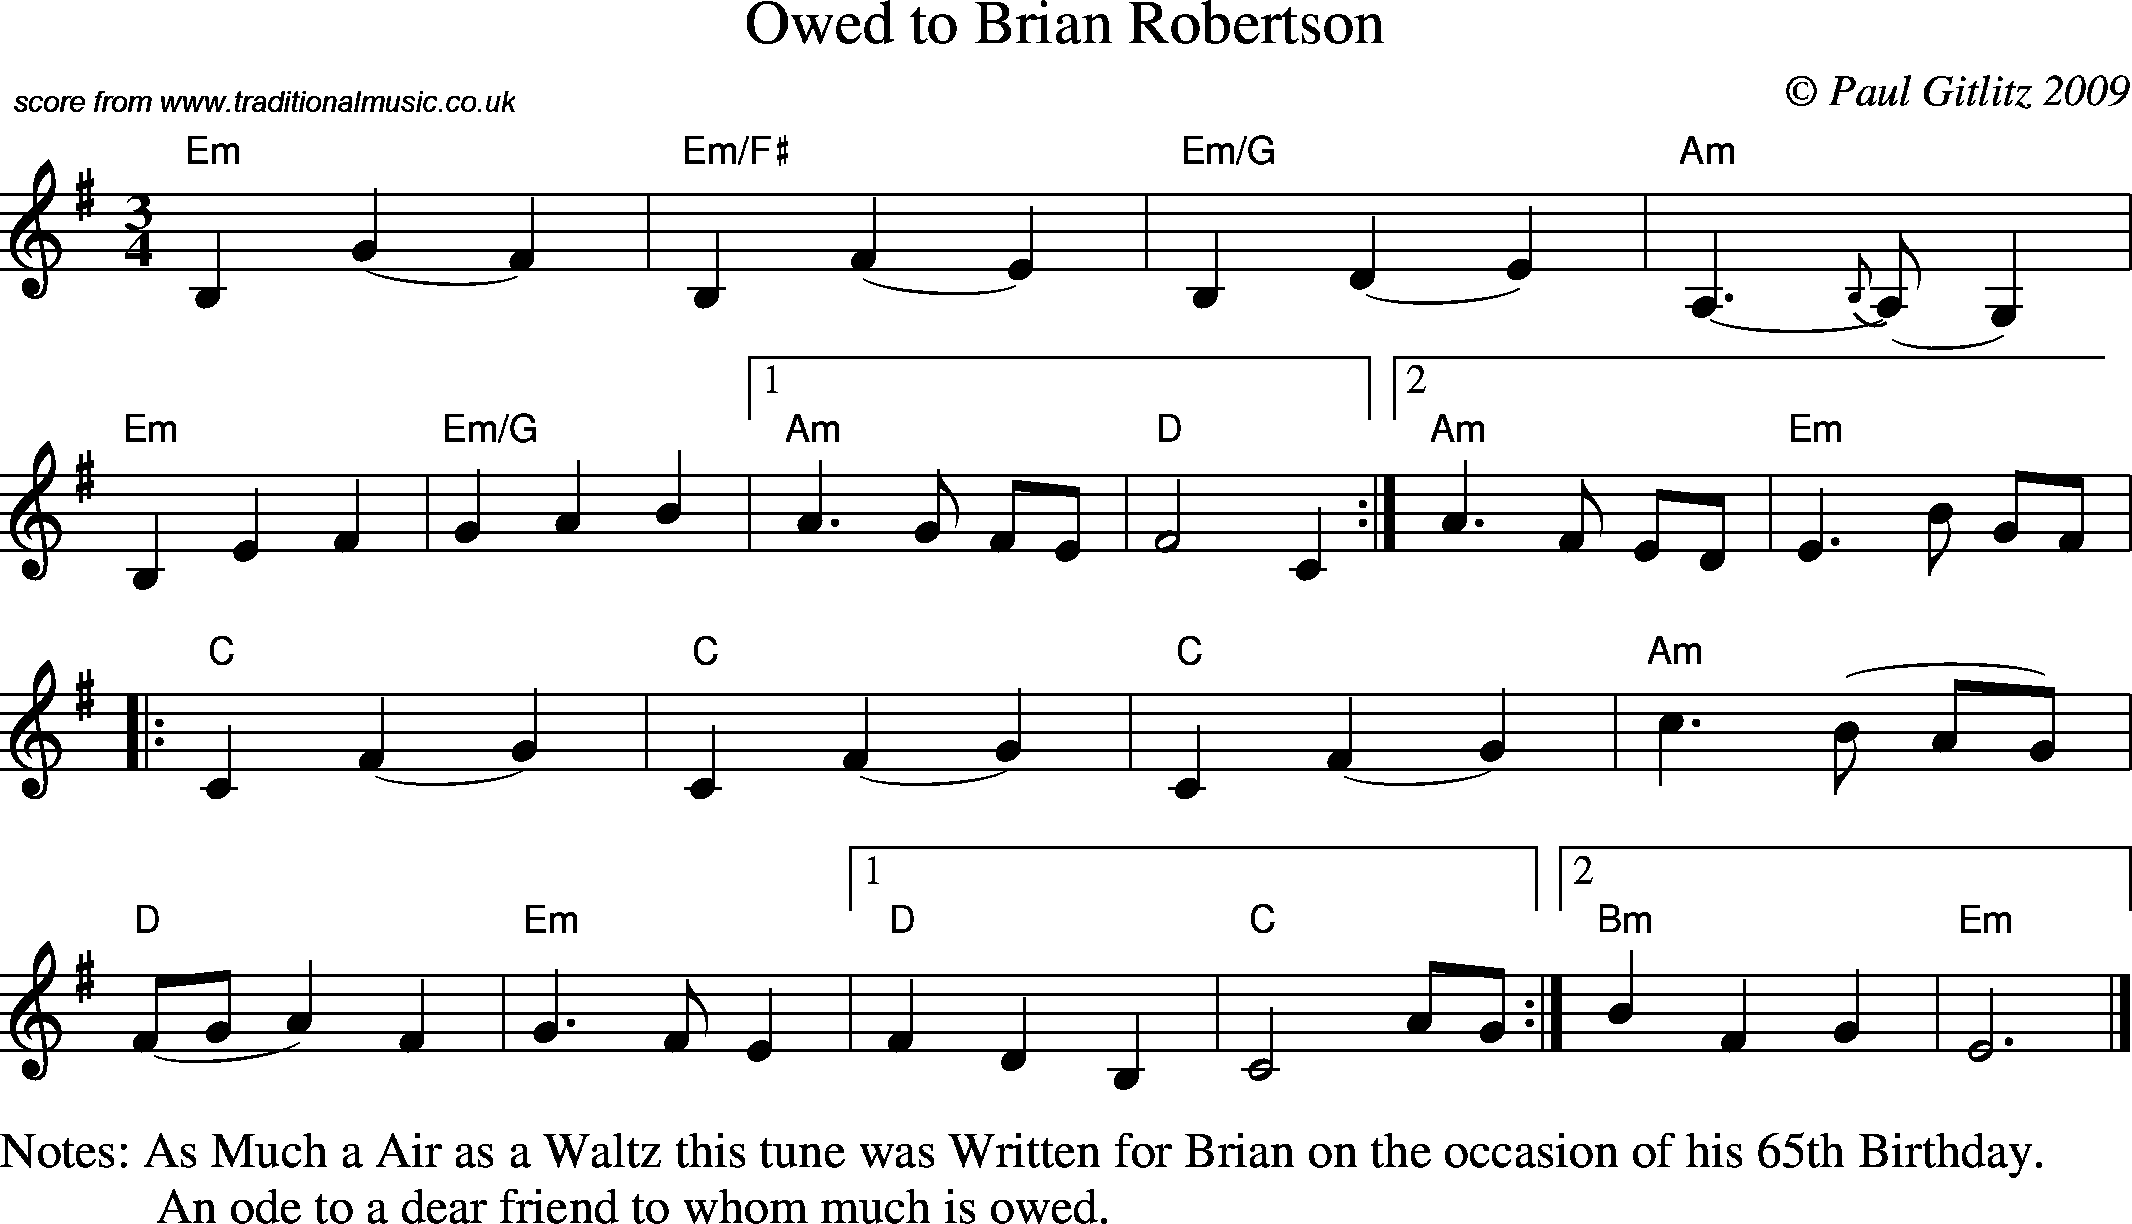 Sheet Music Score for Waltz - Owed to Brian Robertson